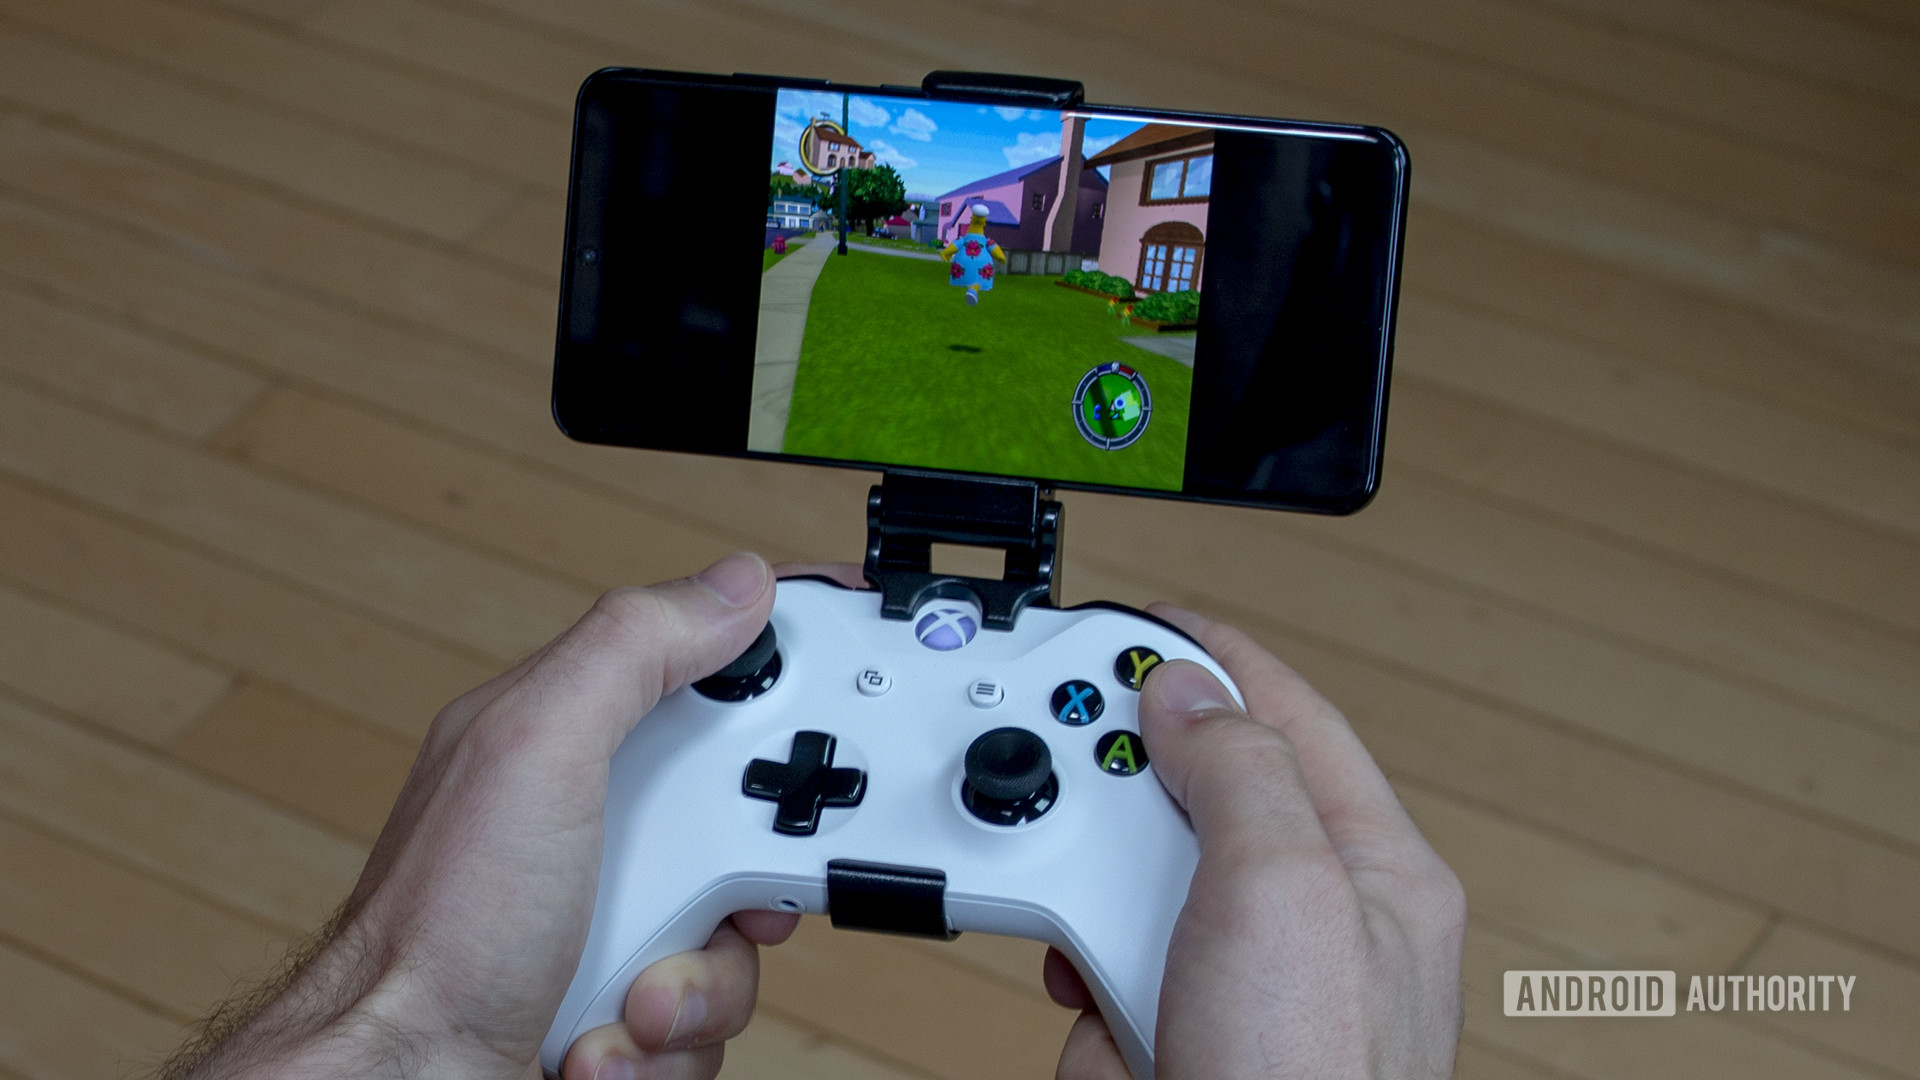 GameCube emulation of Samsung Galaxy S20 Ultra with Xbox controller in hand